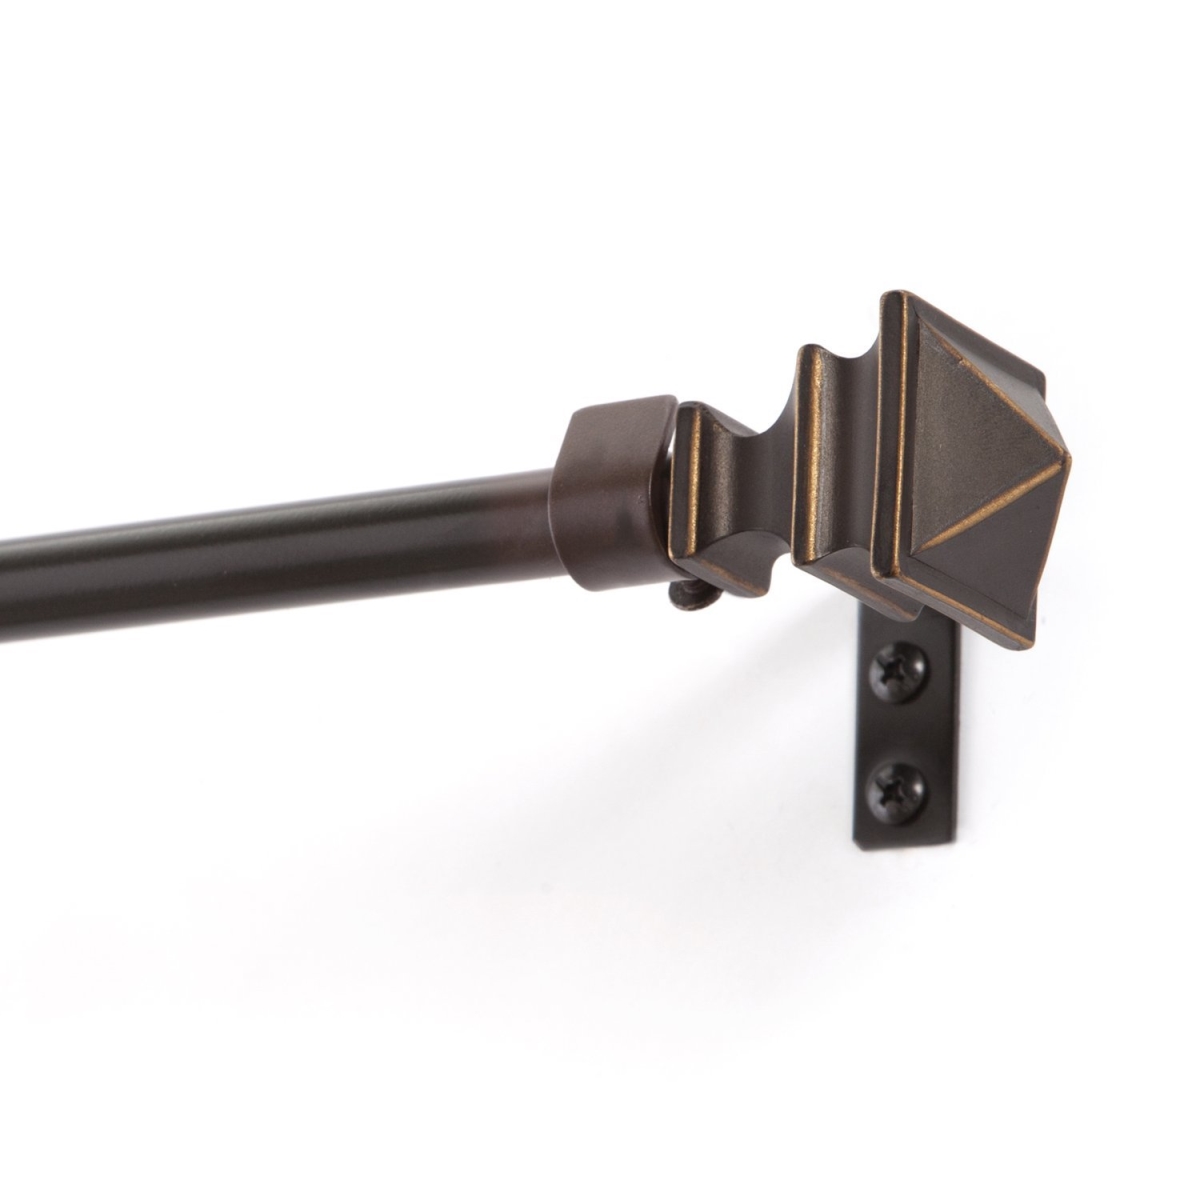 32-1005-8orb 72-144 In. Painted Oil Rubbed Bronze Finish Single Rod Window Hardware With Resin Barbell Finial